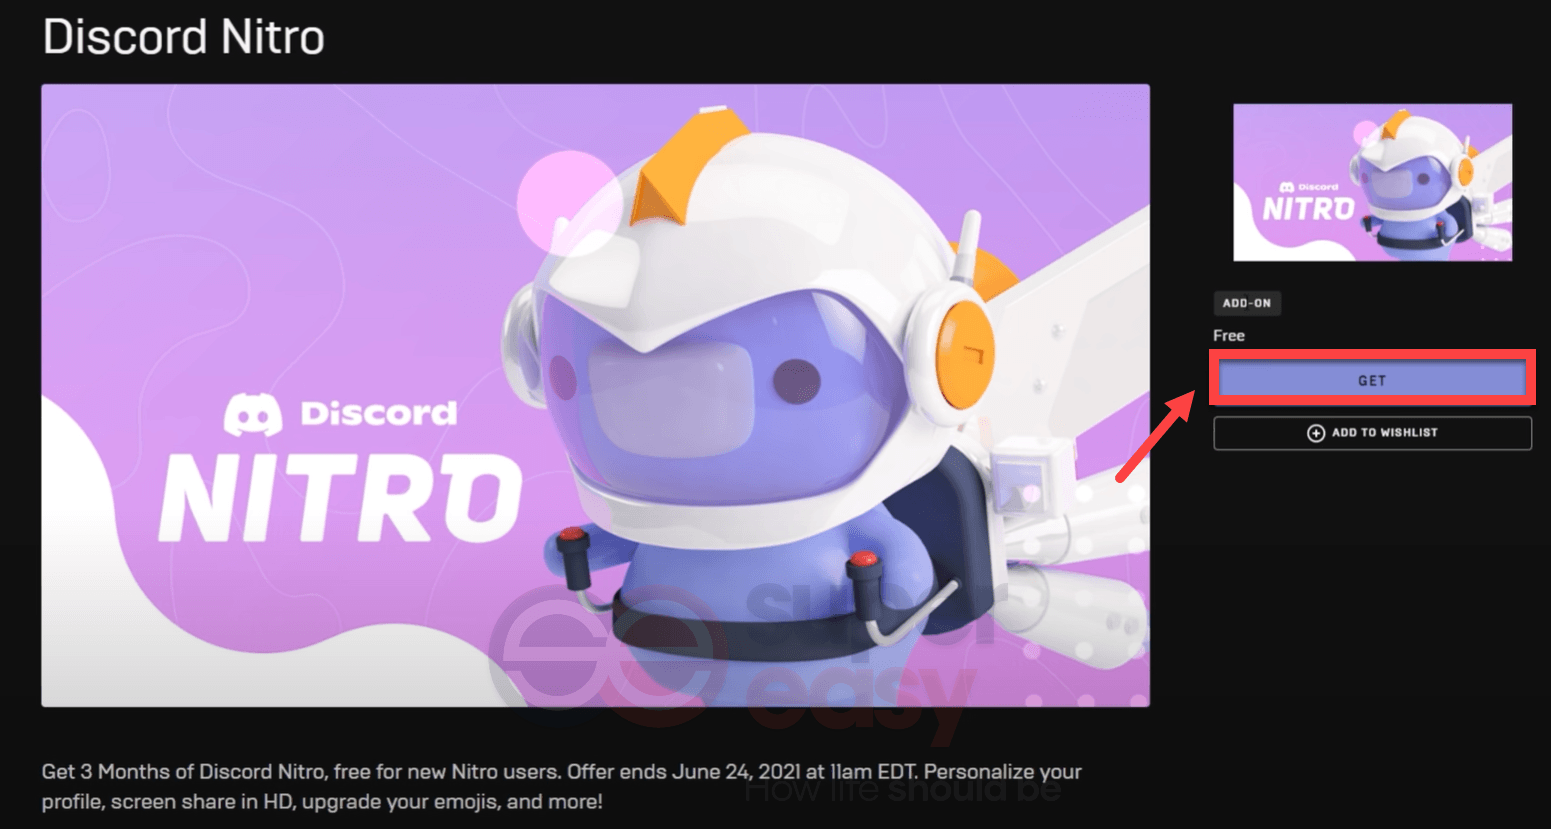 how to get Discord Nitro for free